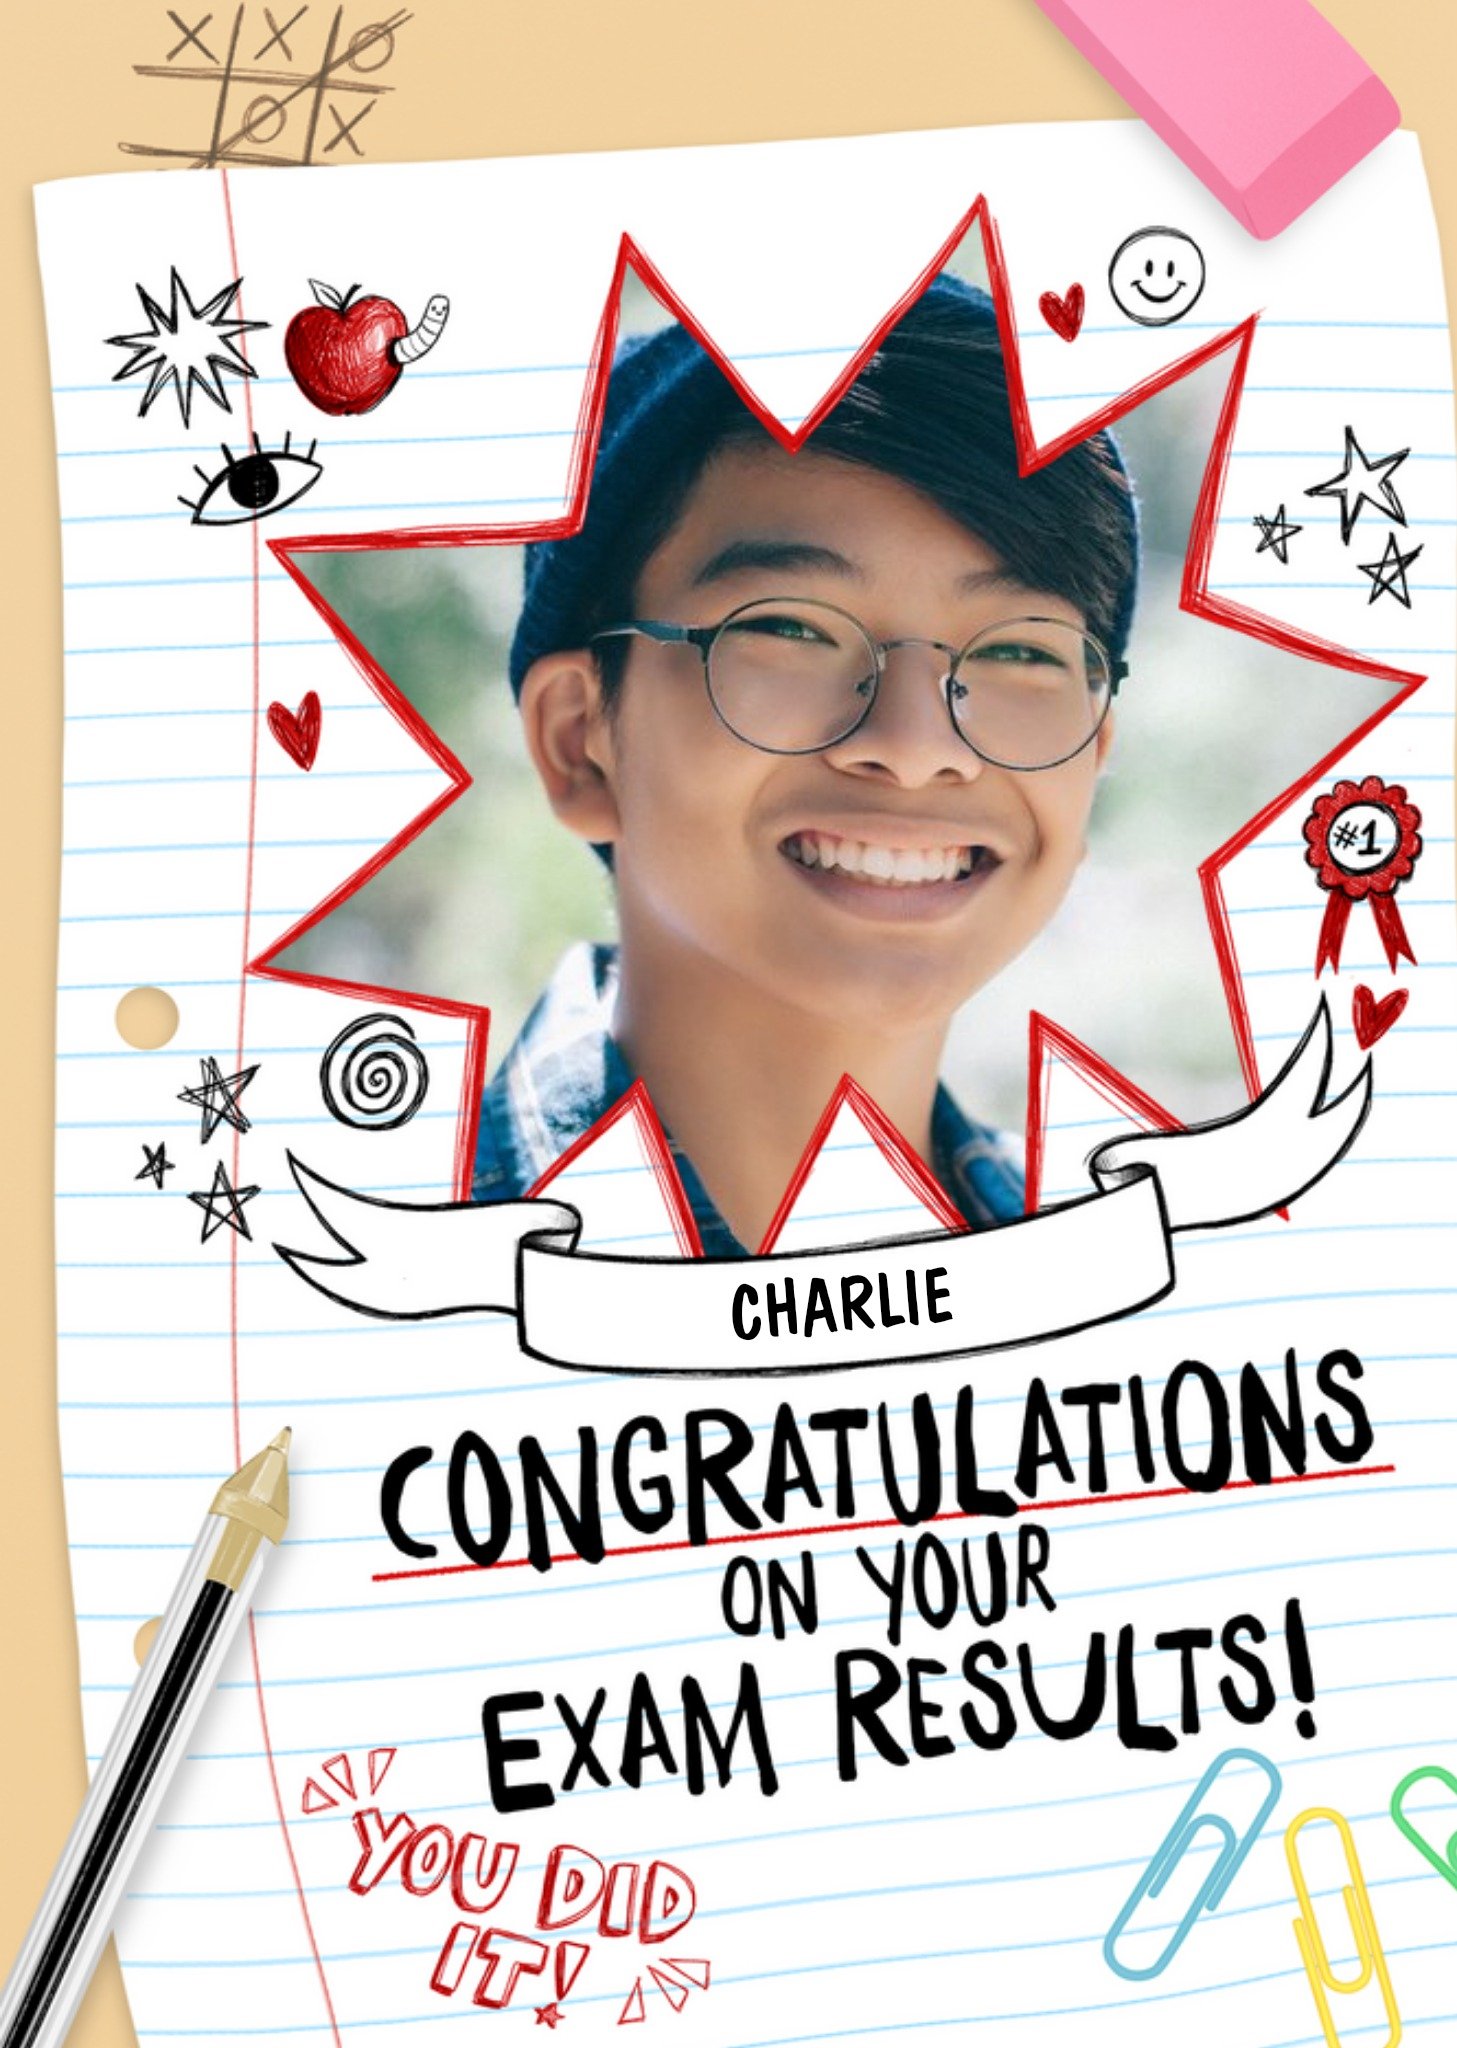 Moonpig School Themed Illustration With Note Paper Congratulations On Your Exam Results Photo Upload